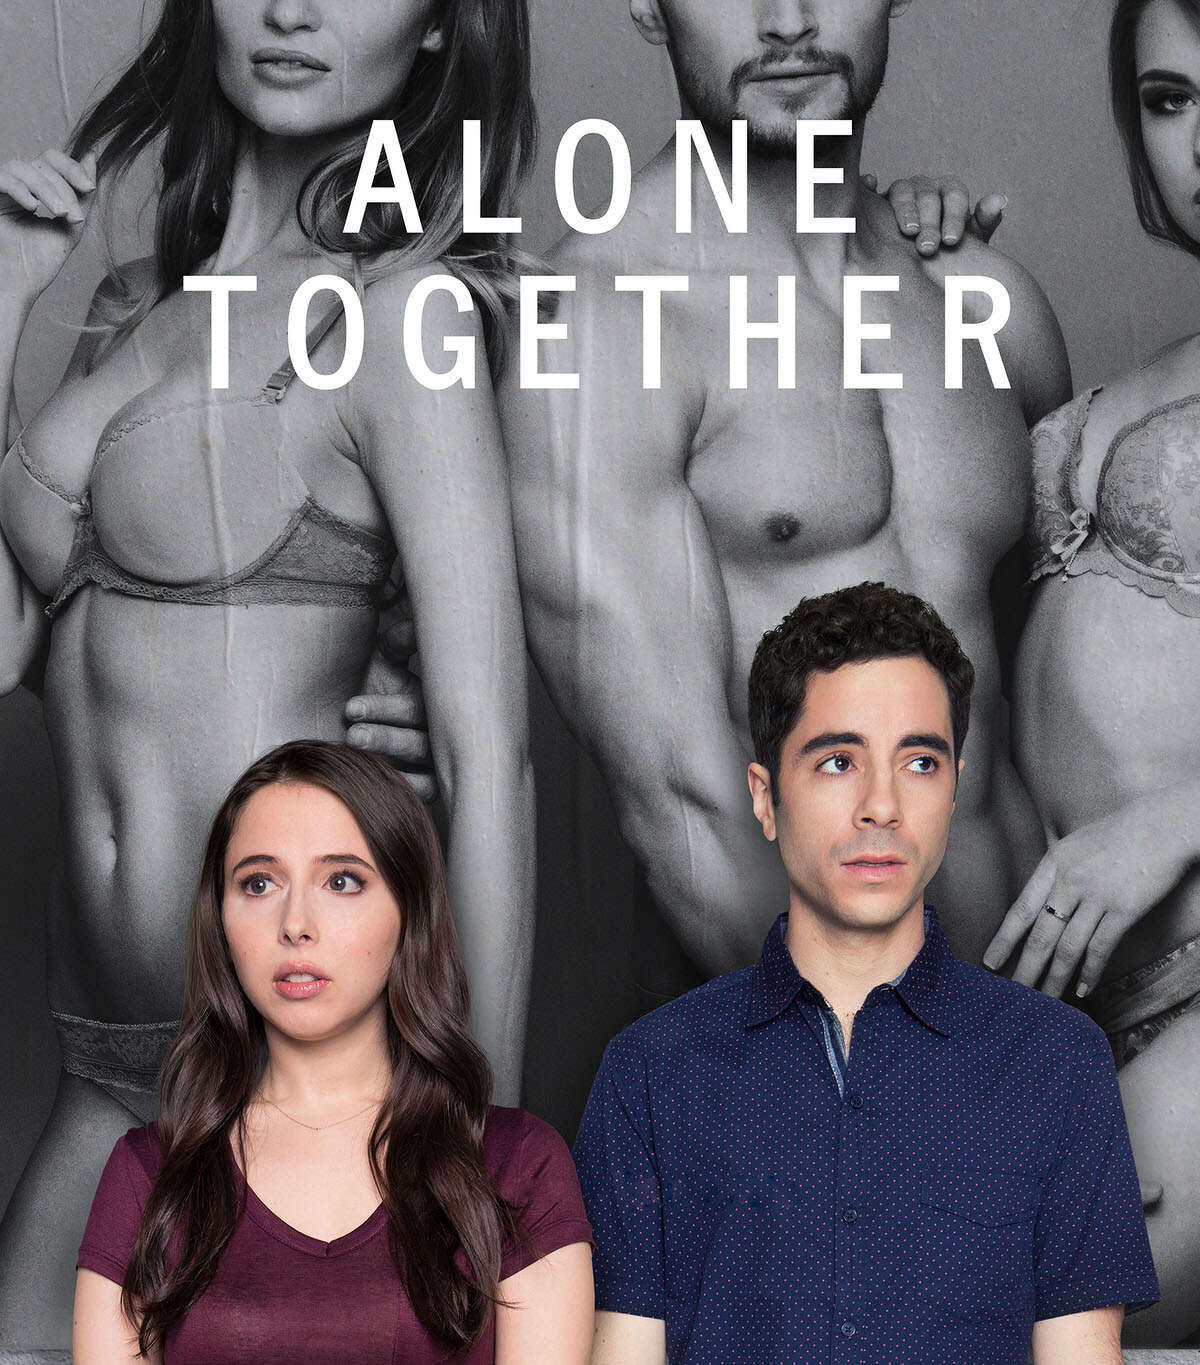 ALONE TOGETHER - ?“Alone Together?” is a half-hour, single-camera comedy starring Esther Povitsky (?“Lady Dynamite,?” ?“Crazy Ex-Girlfriend?”) and Benji Aflalo (?“Not Safe with Nikki Glaser?”). Esther and Benji are platonic best friends who want nothing more than to be accepted by the vain and status-obsessed culture of Los Angeles. Despite their sometimes contentious relationship, when push comes to shove, they?’ve got each other?’s back ?… And they have nobody else to hang out with. ?“Alone Together?” comes from Esther Povitsky, Benji Aflalo and Eben Russell (?“Girl Boss?”), who serve as writers and executive producers. Andy Samberg, Jorma Taccone, Akiva Schaffer, Billy Rosenberg and Hunter Covington also serve as executive producers. Daniel Gray Longino (?“Lady Dynamite,?” ?“Portlandia?”) directed the pilot. (Freeform/Vu Ong) ESTHER POVITSKY, BENJI AFLALO